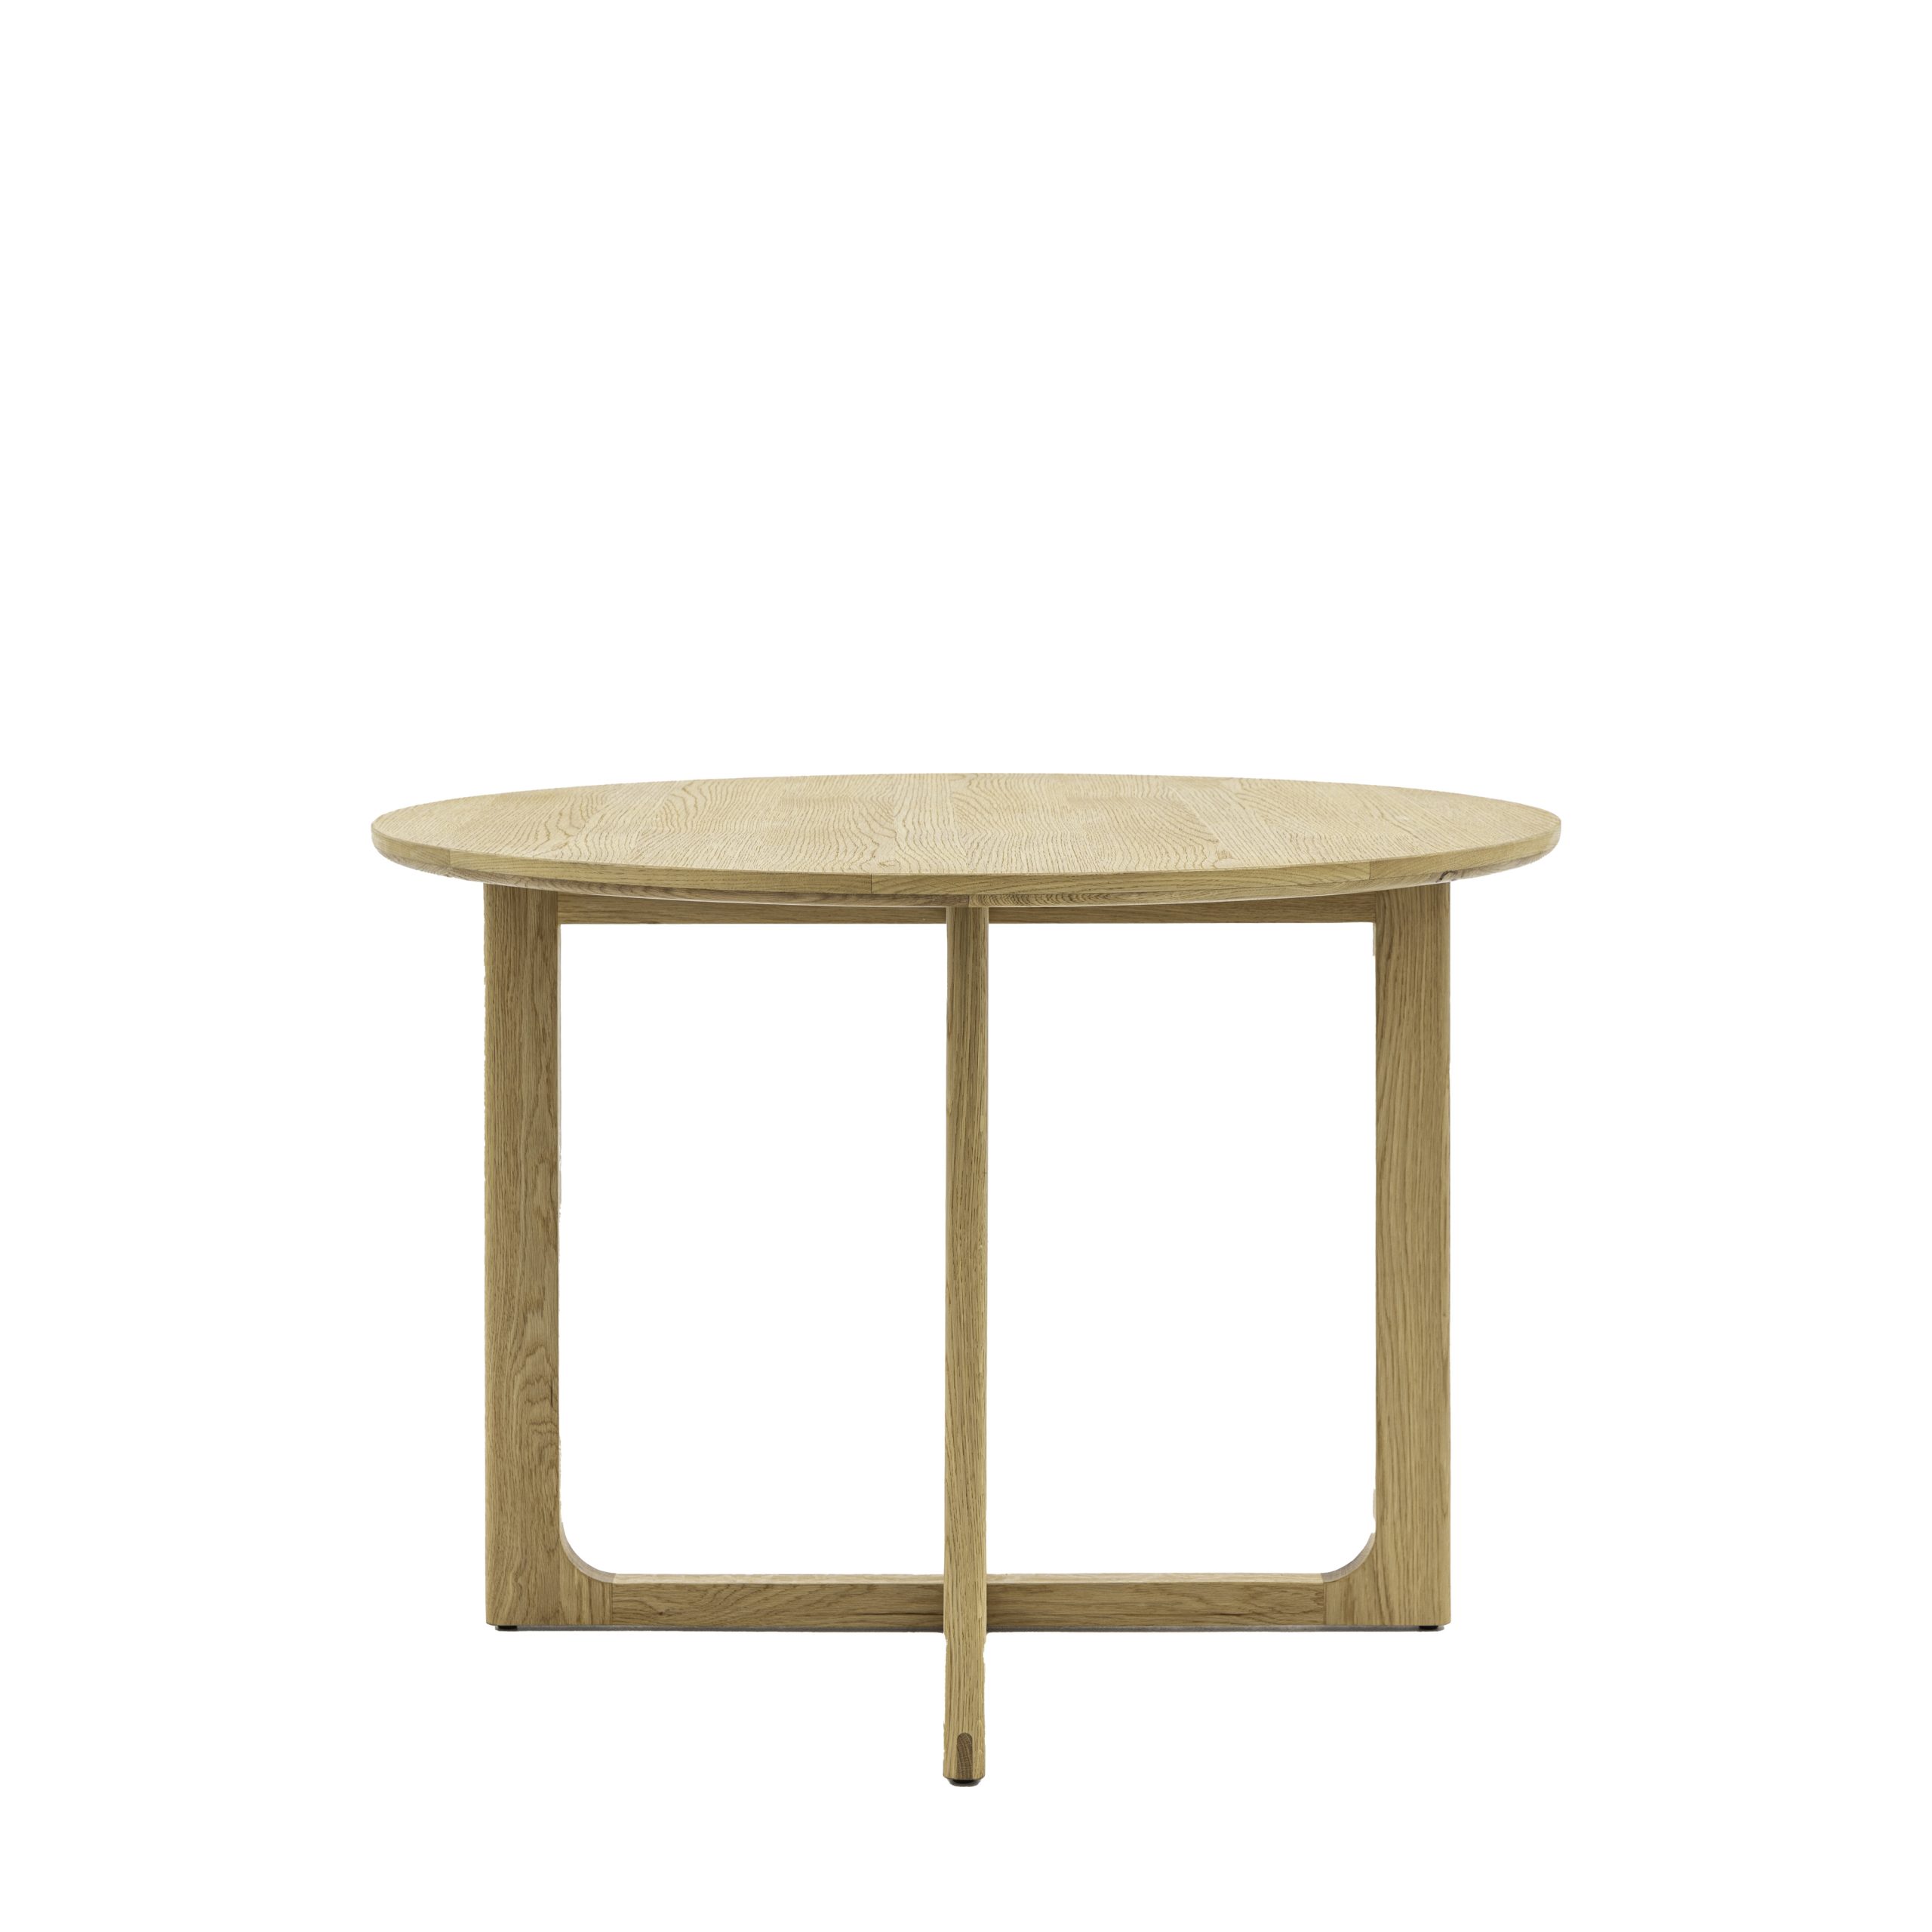 Gallery Direct Craft Round Dining Table Natural